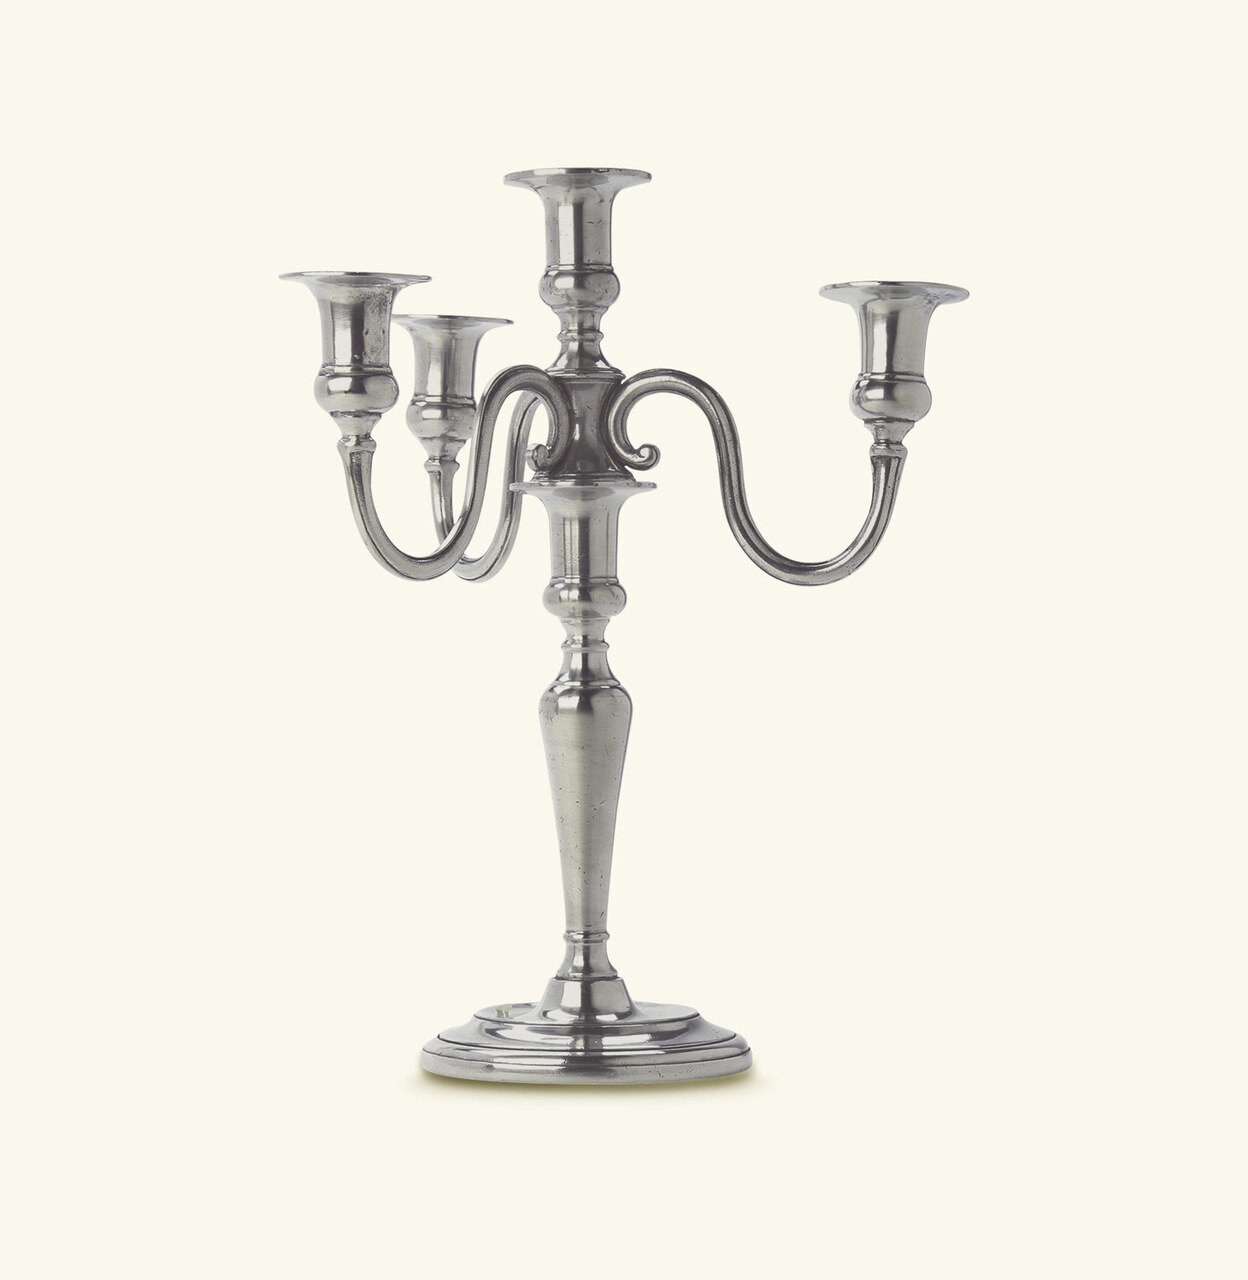 Match Pewter 4 Flame Candelabra Arms 1041.1